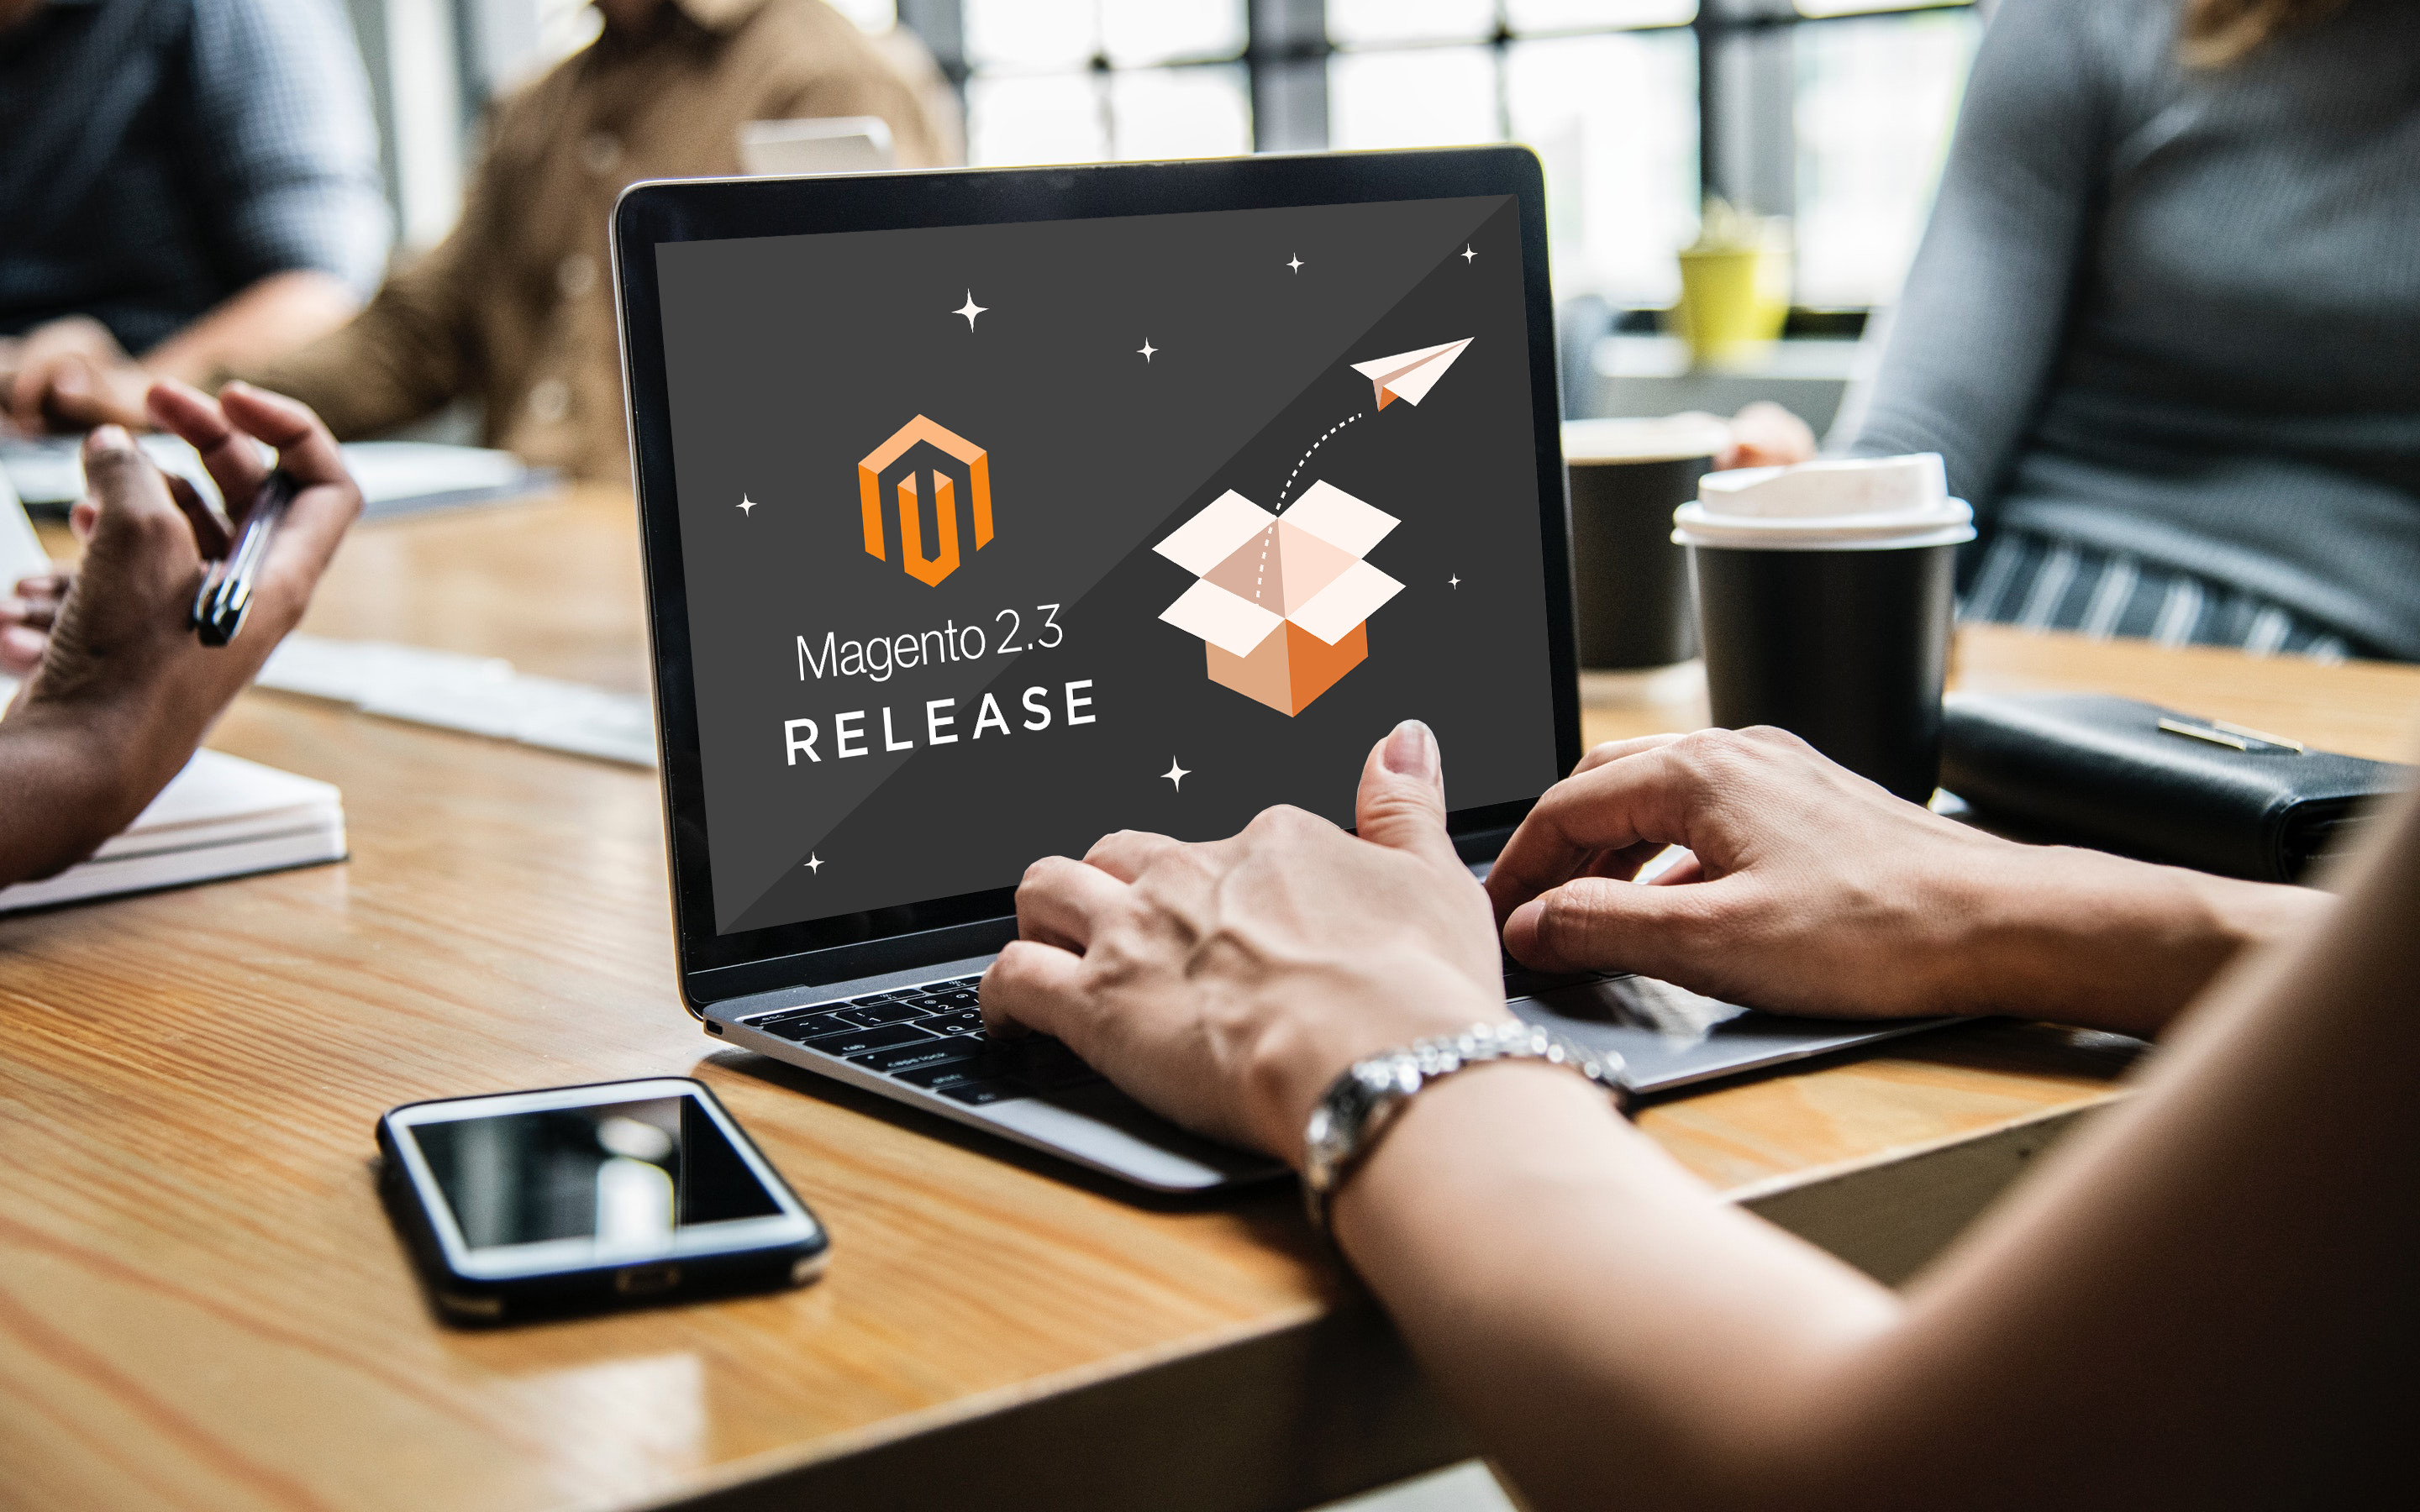 Magento 2.3 Release splashscreen, on a laptop on a wooden table